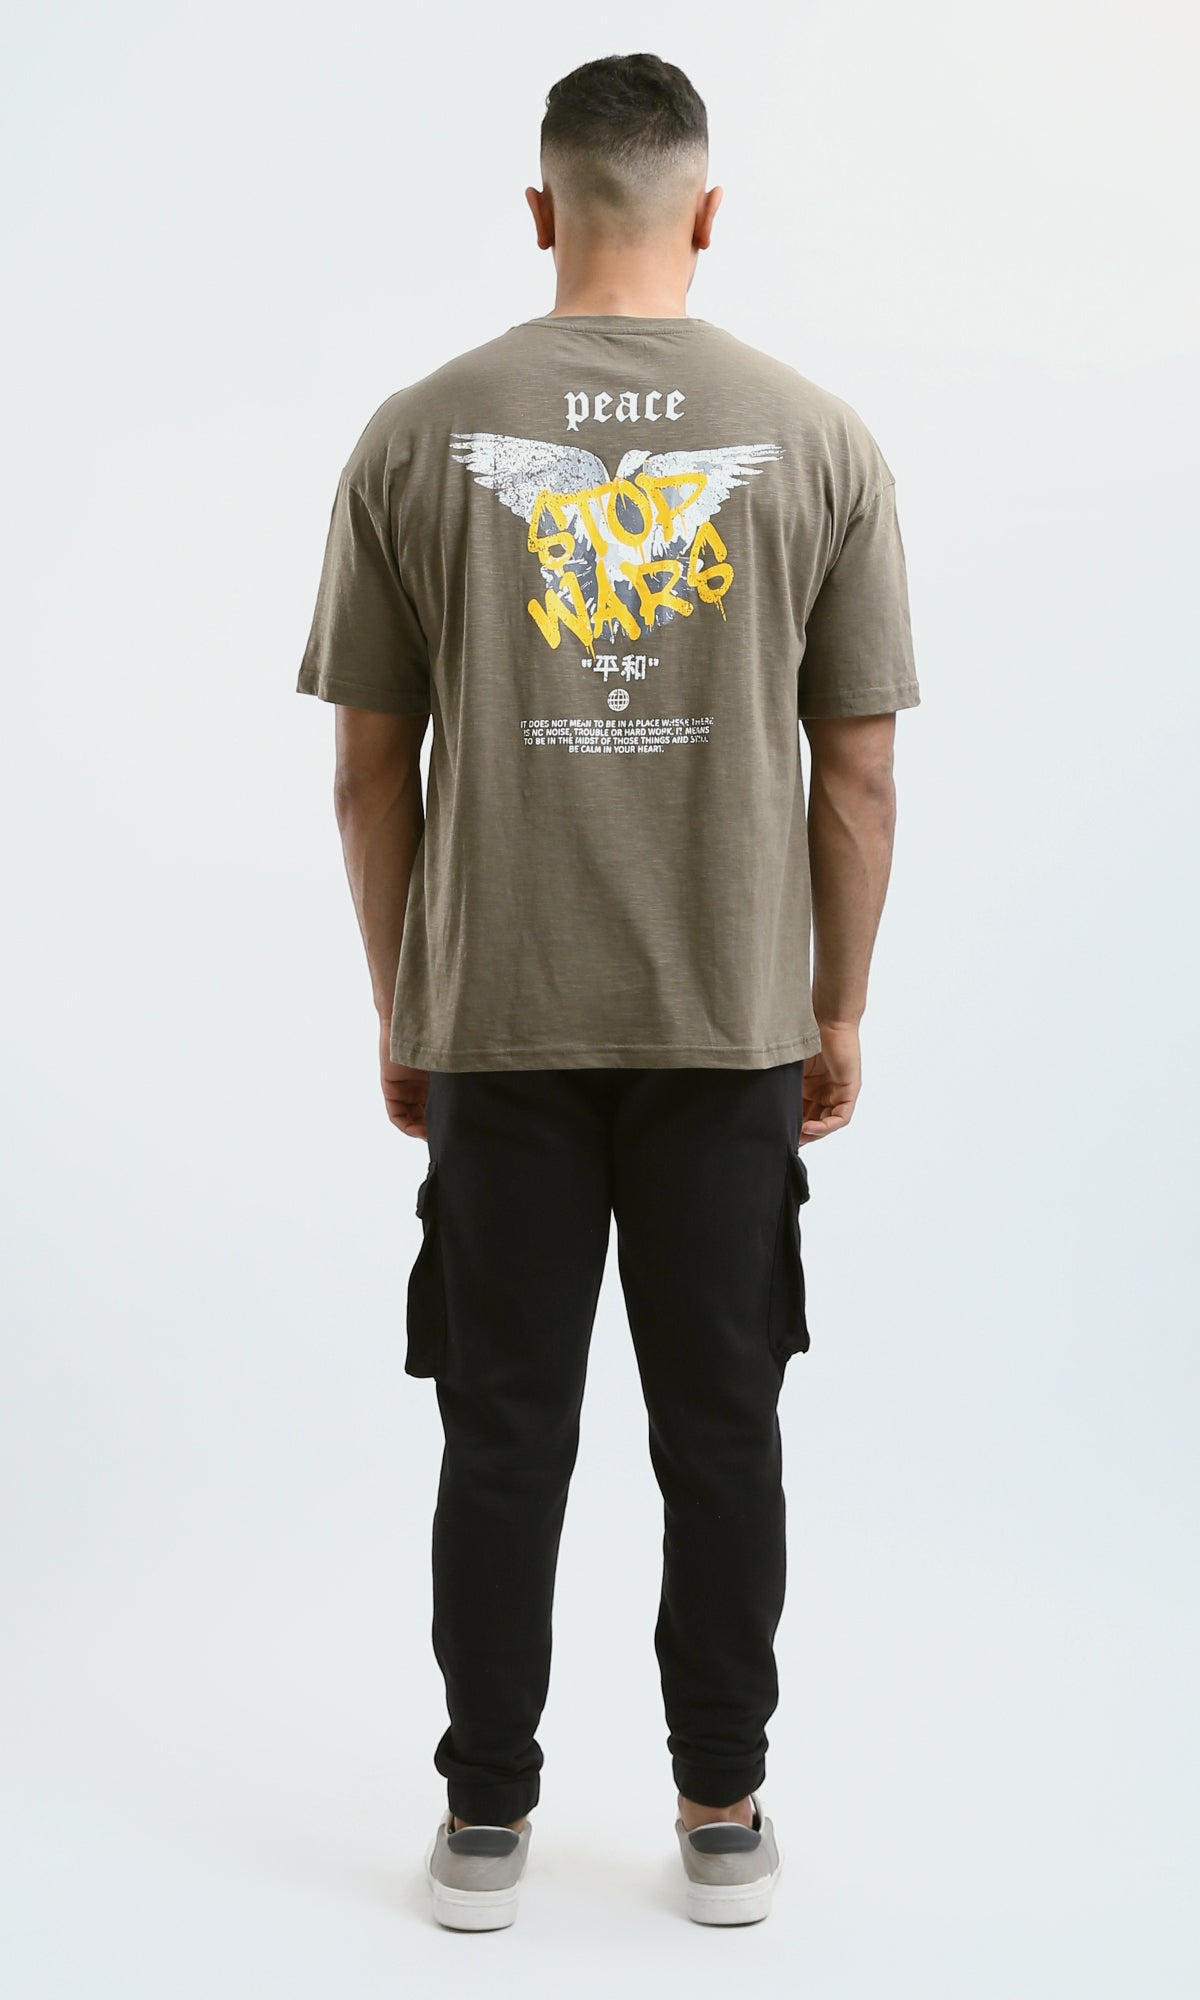 O179365 Printed "Stop Wars" Relaxed Fit Heather Dark Khaki Tee